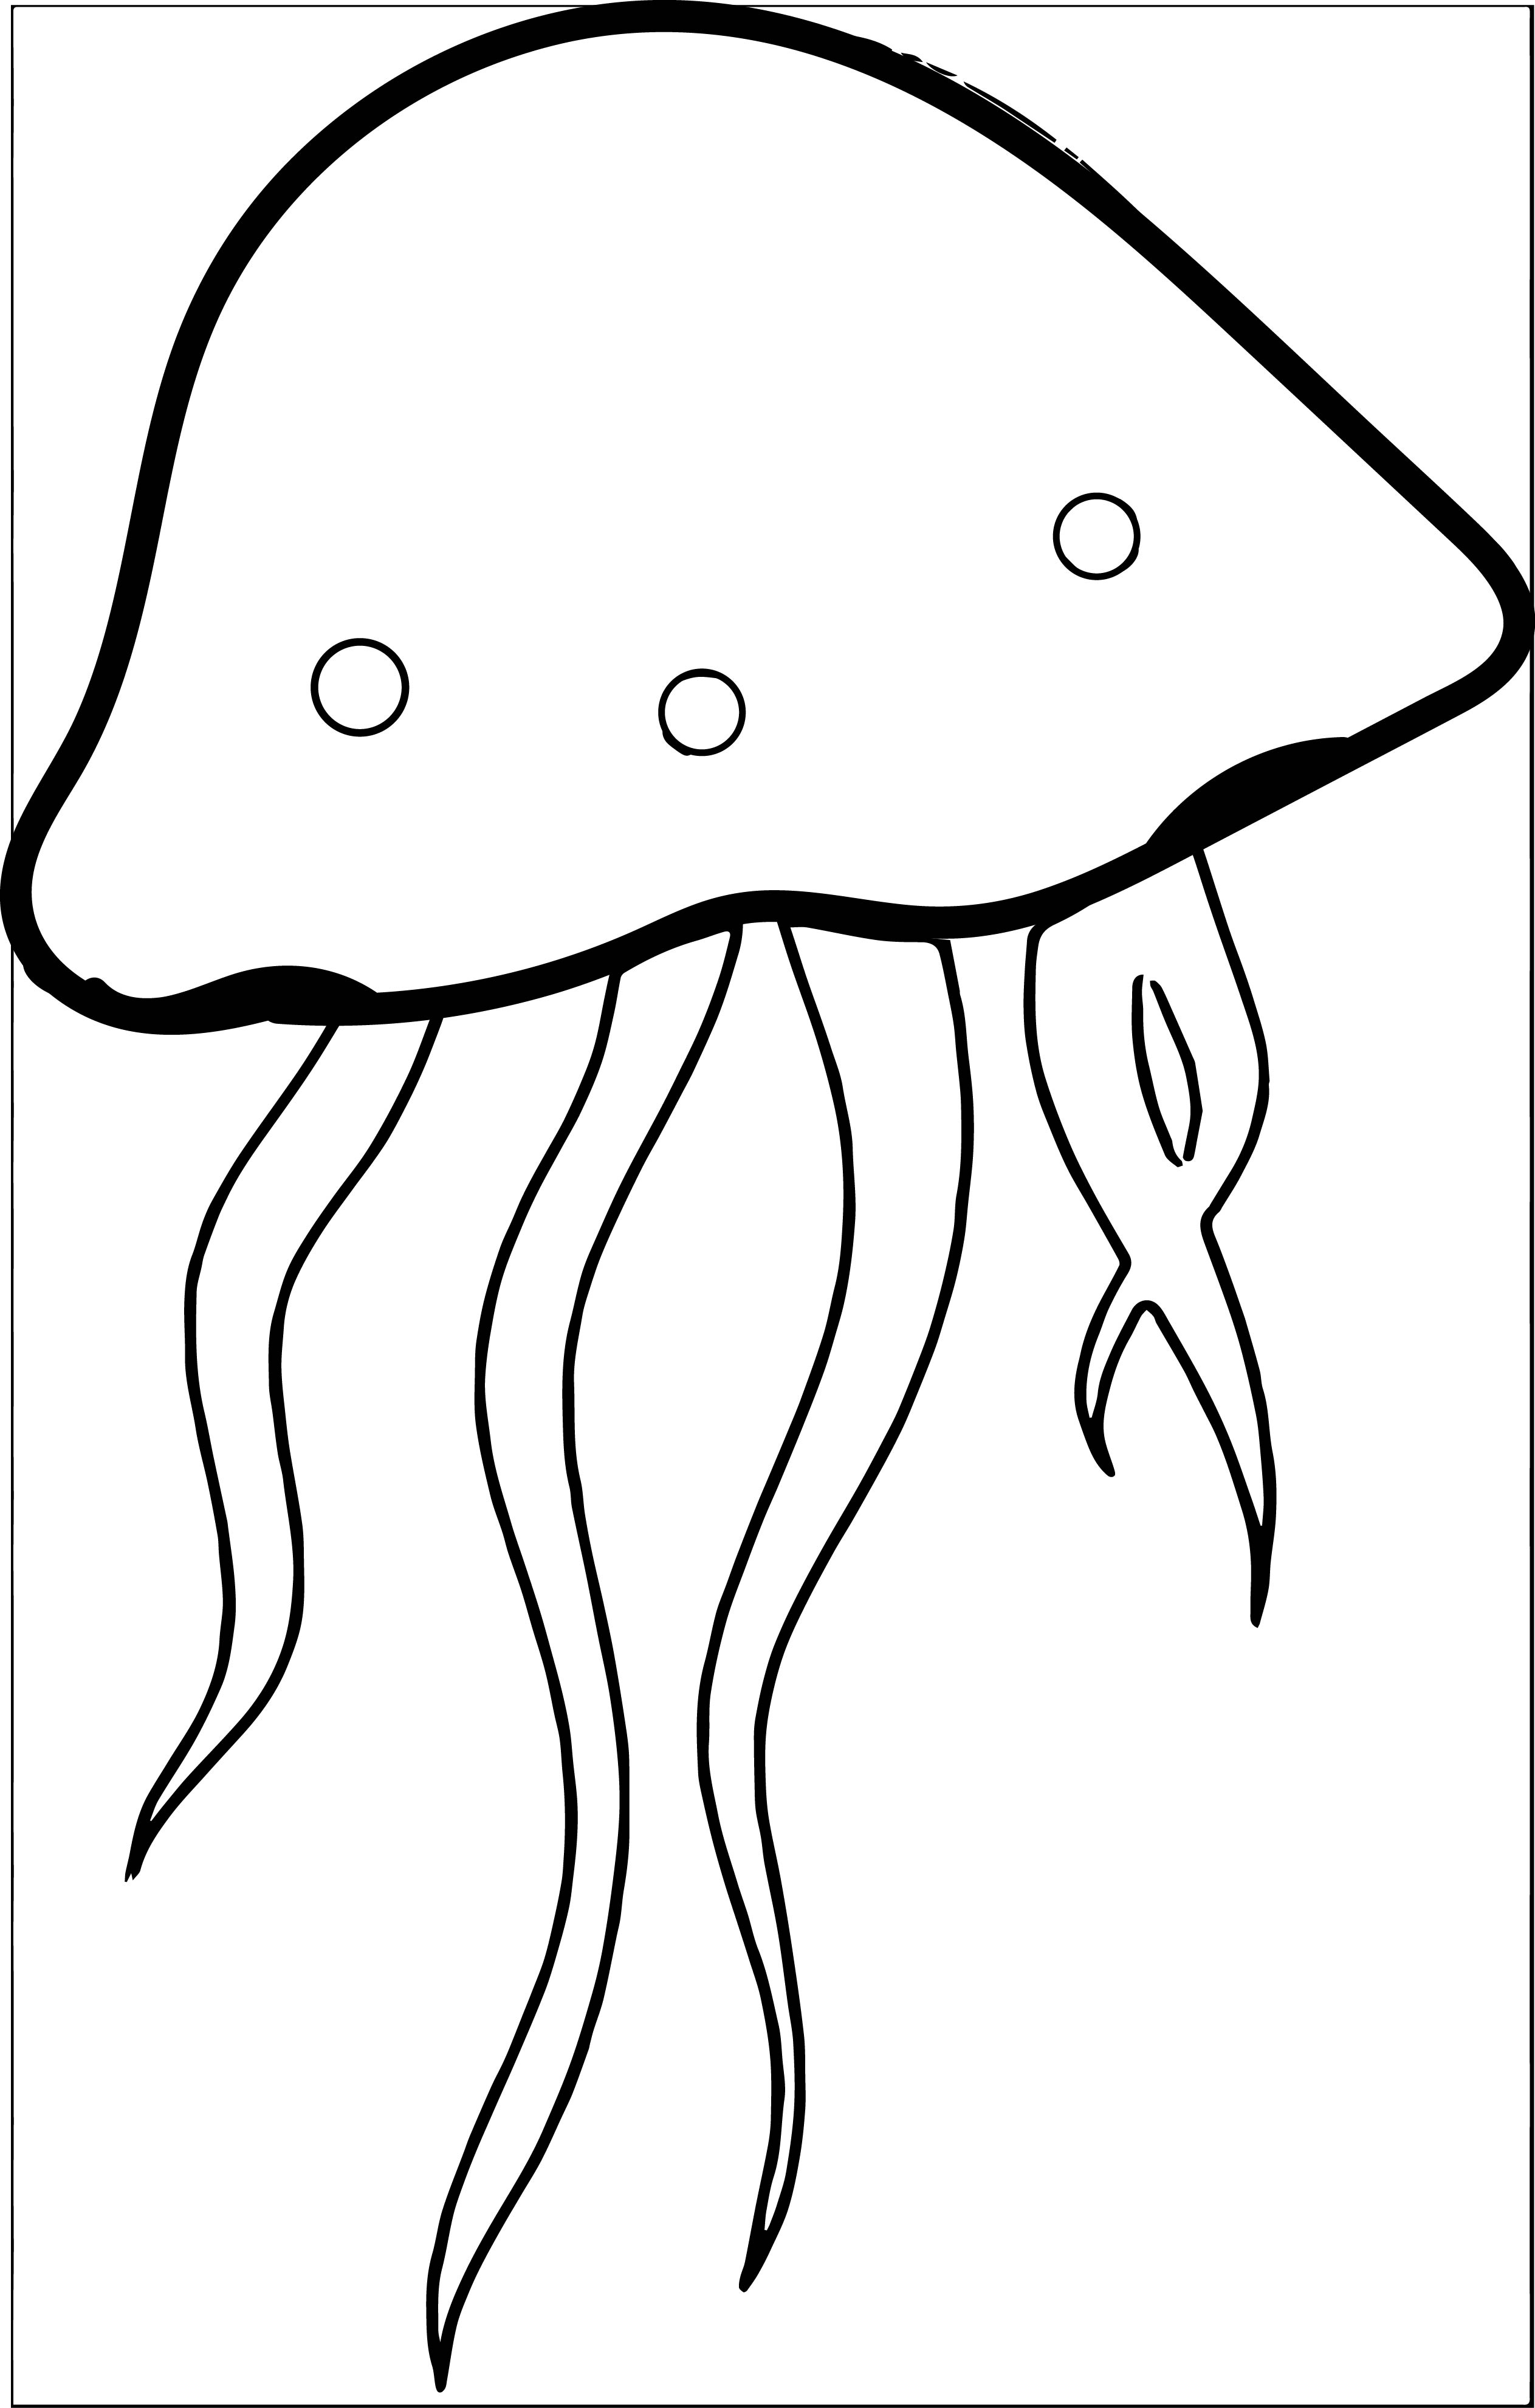 clipart pictures of jellyfish - photo #40